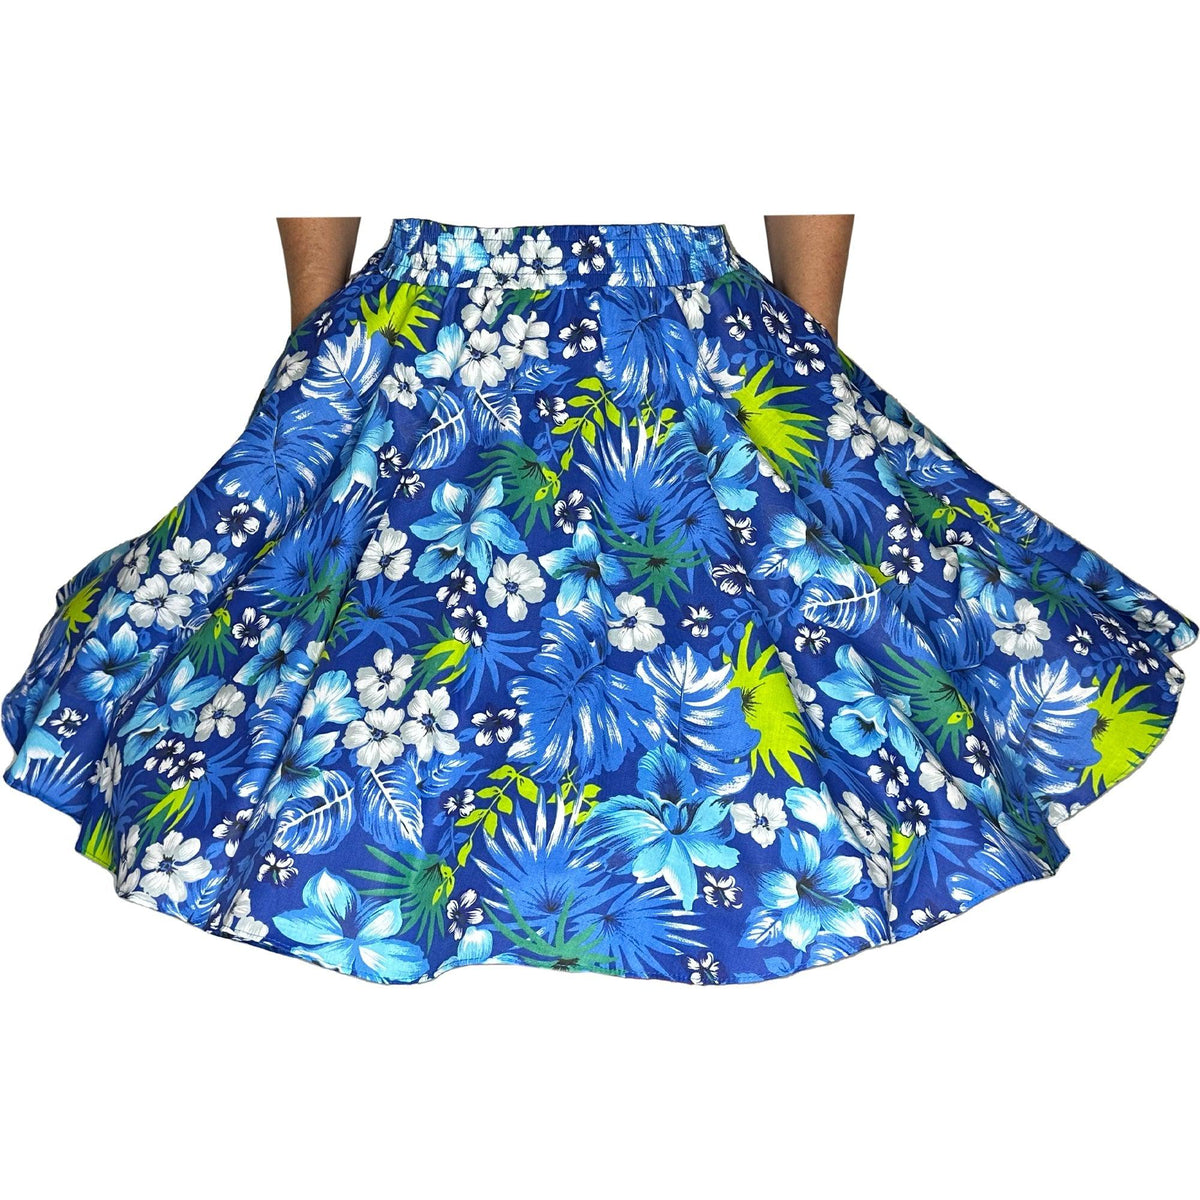 A woman wearing a Tropical Hawaiian Square Dance Skirt adorned with palm leaves and Hibiscus flowers from Square Up Fashions.